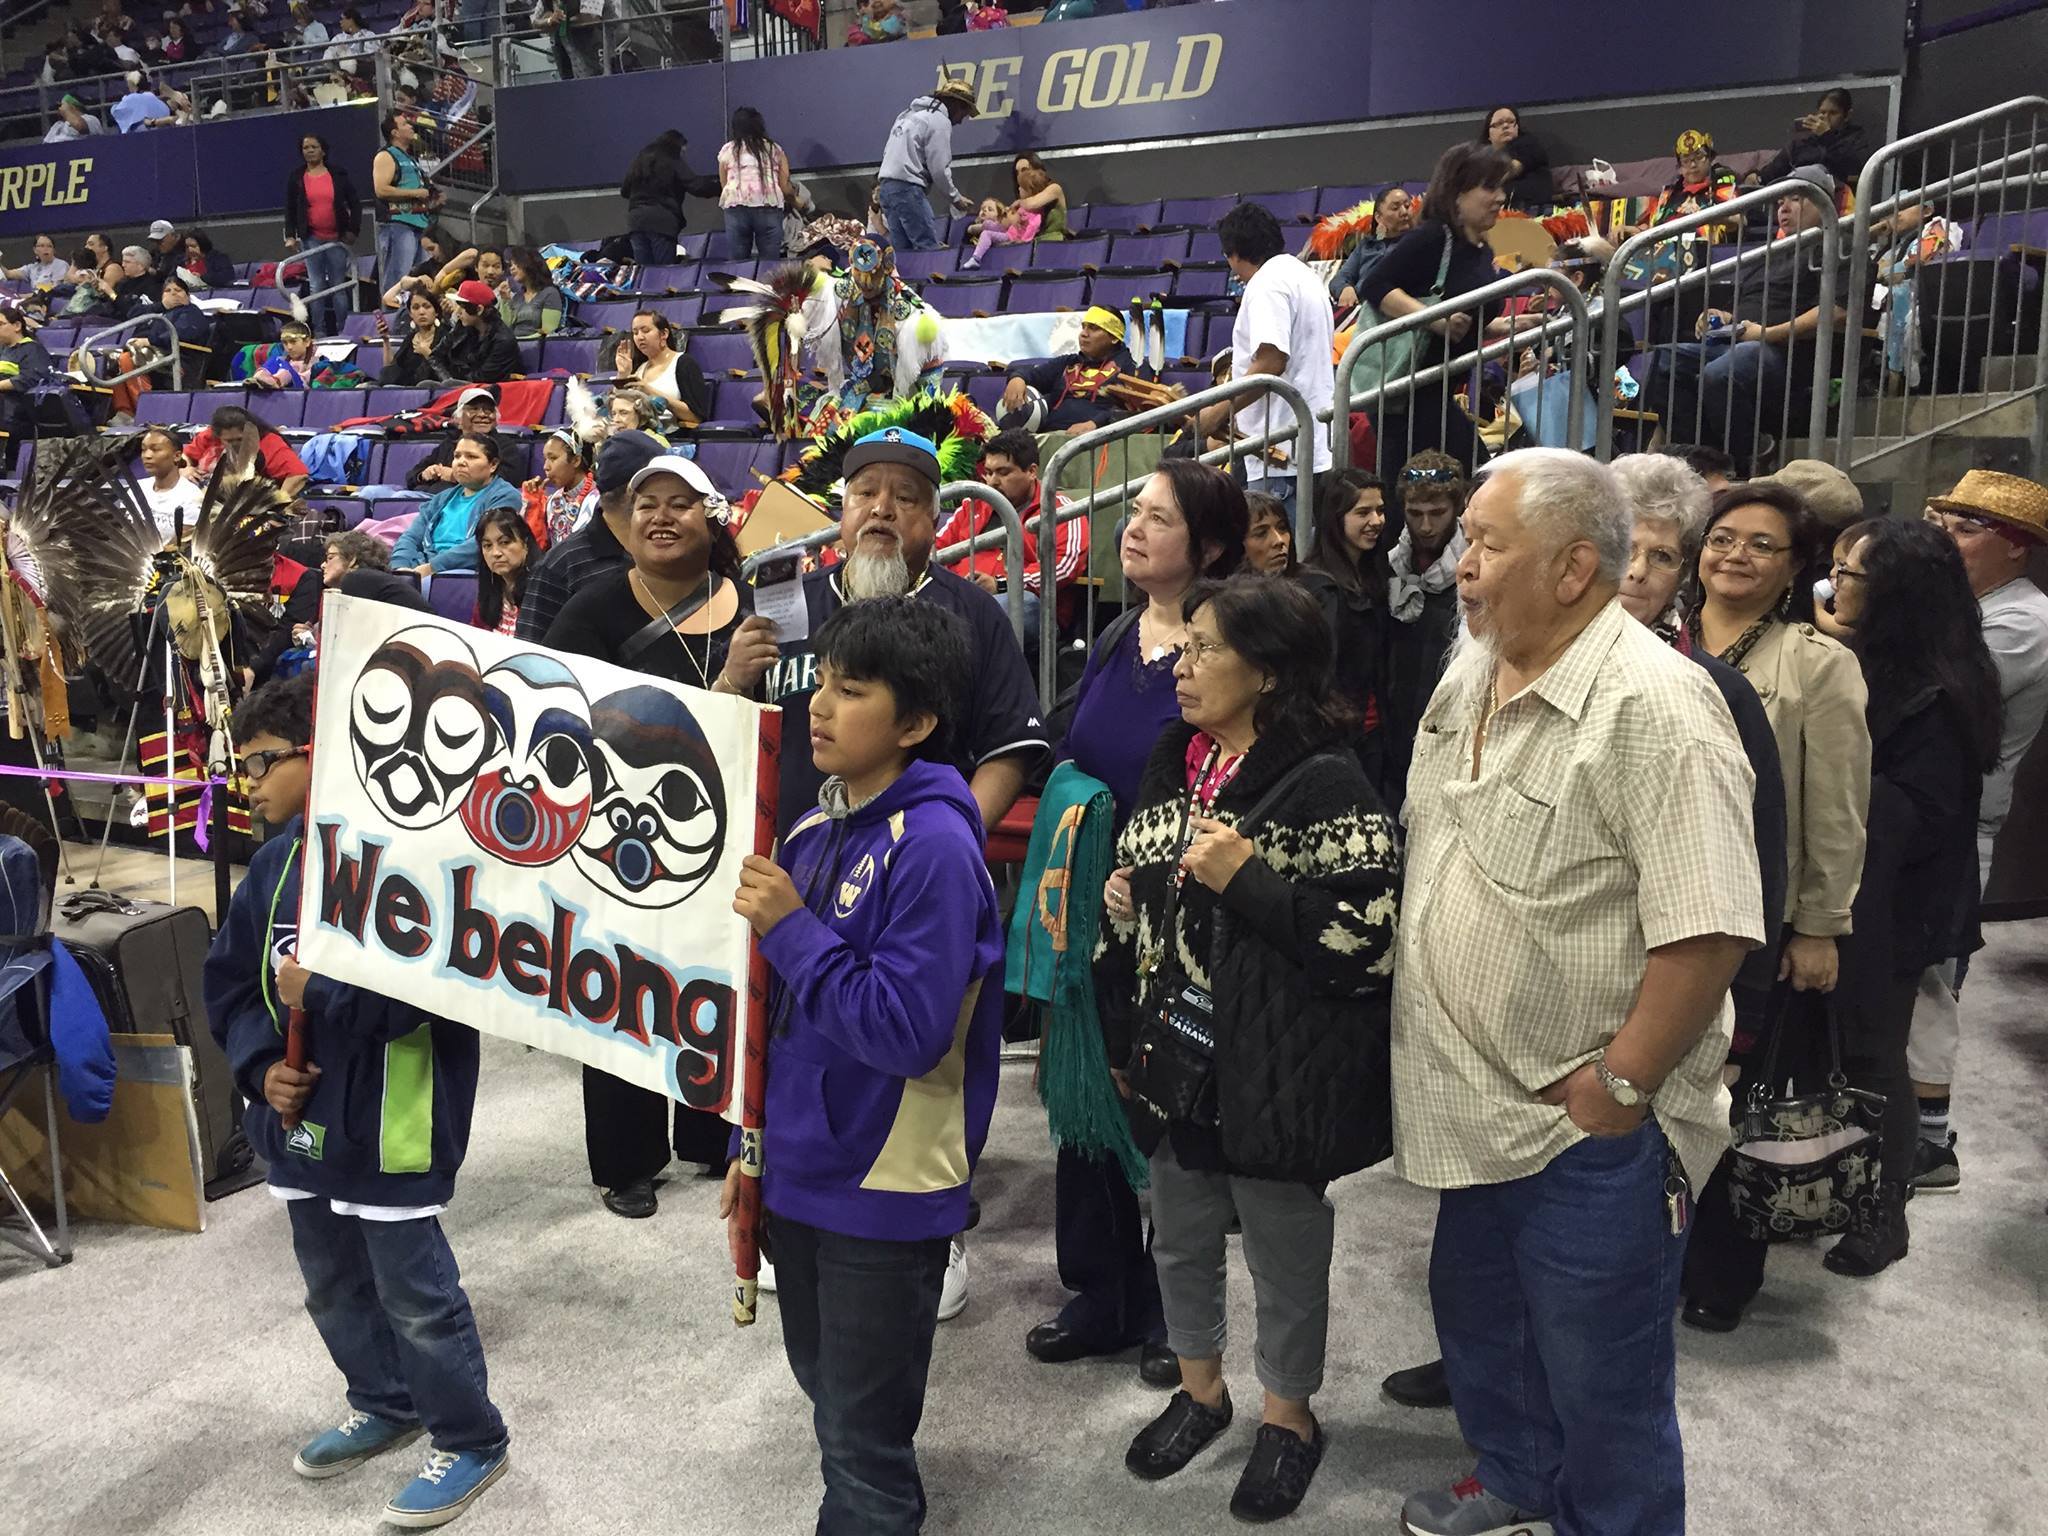 Peter d'Errico: Nooksack Tribe fuels bad stereotypes about courts